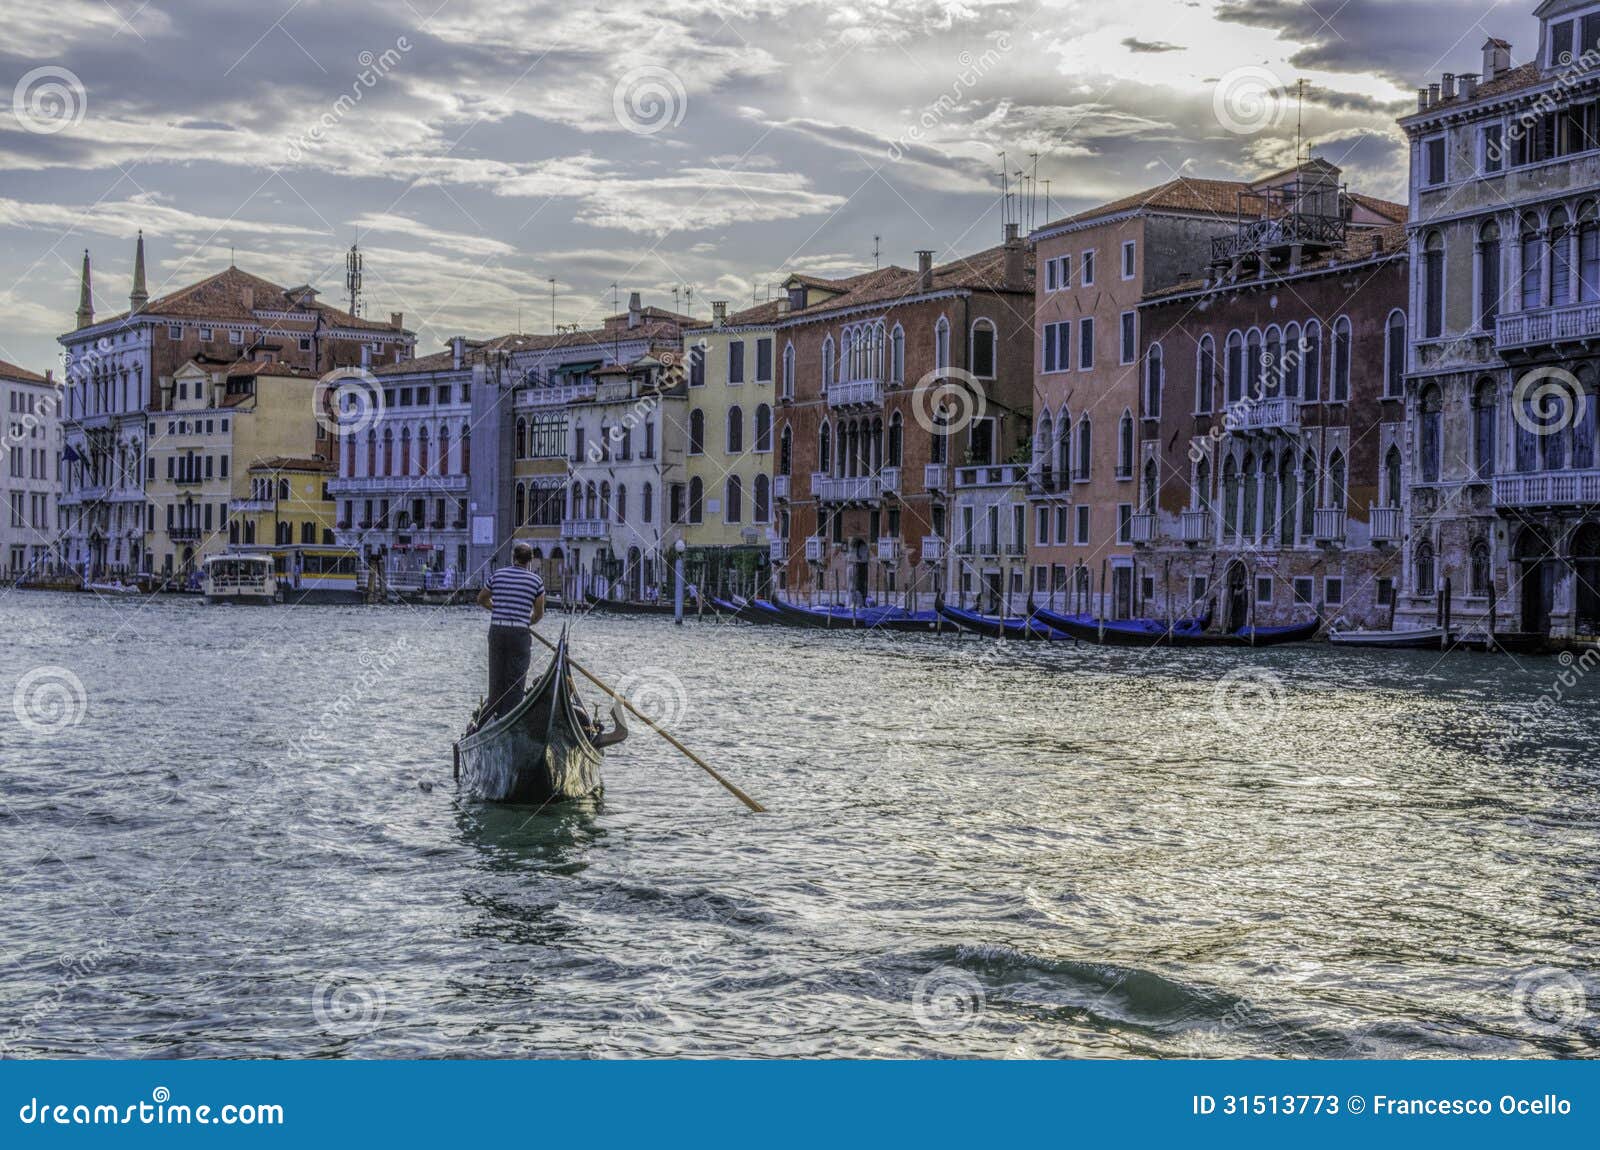 gondola and gondolier on the grand canal, venice